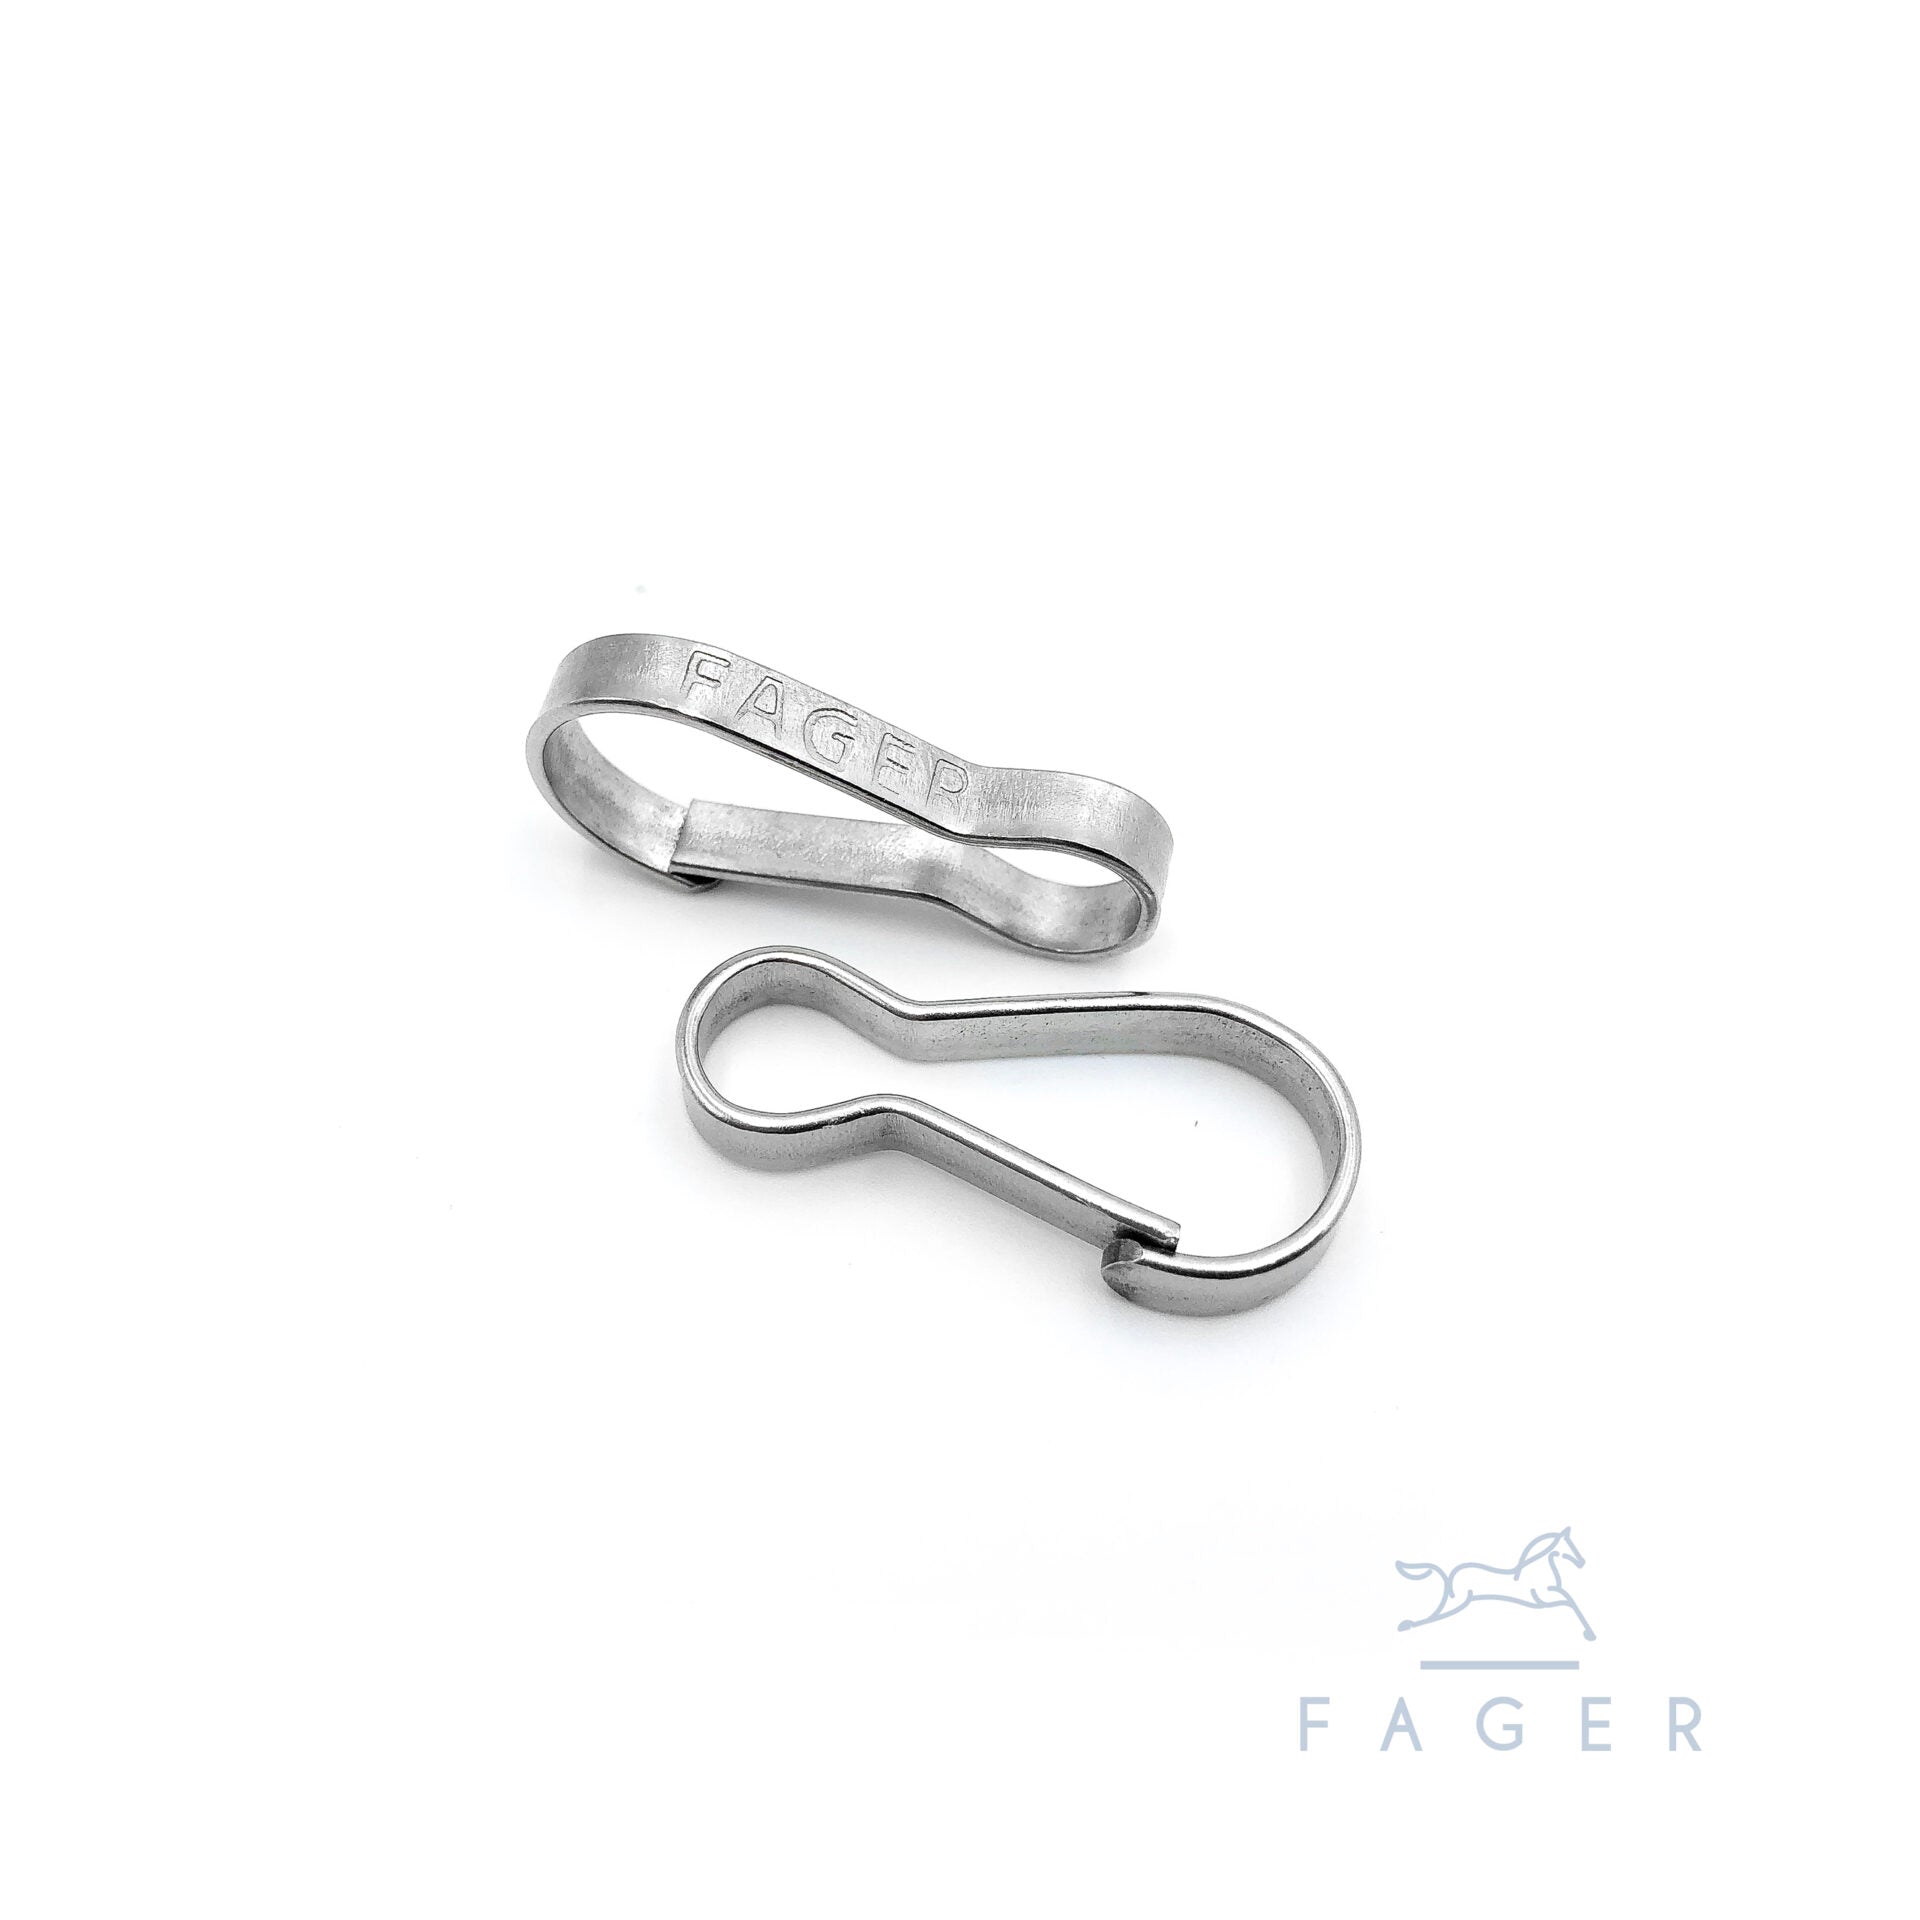 Fager's Secure Clasp